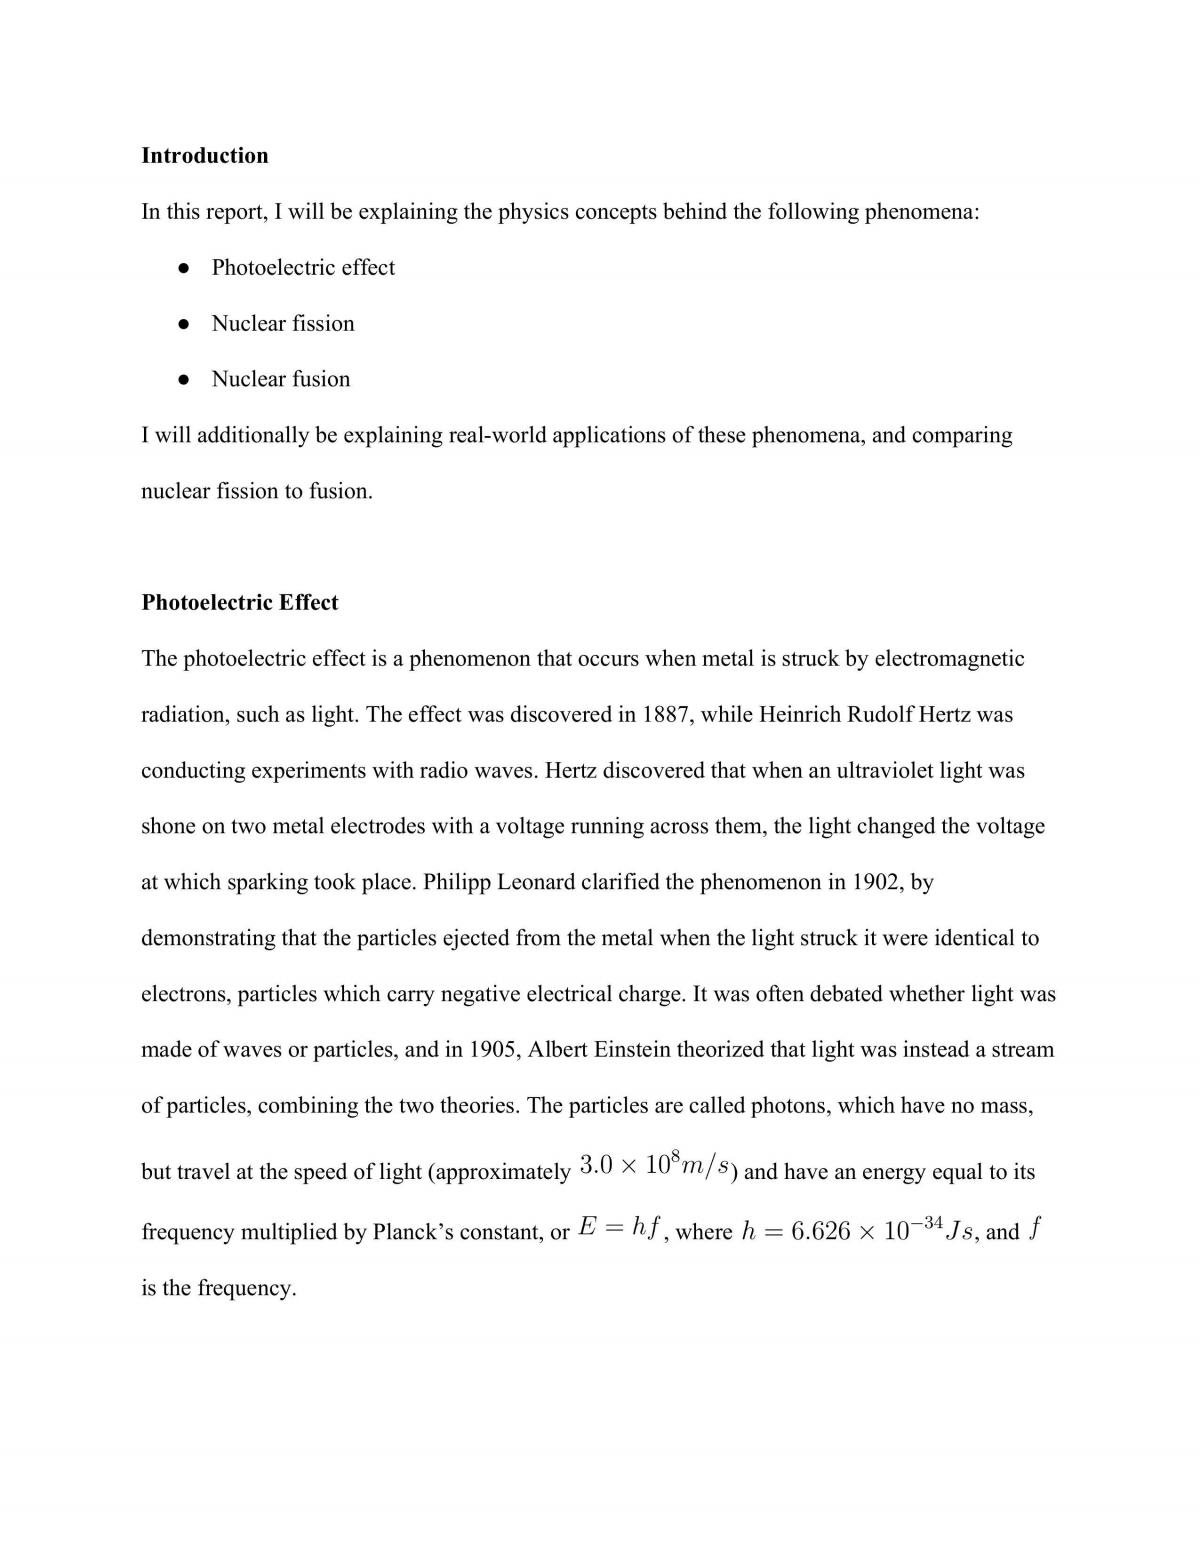 Essay discussing photoelectric effect, nuclear fission and fussion, for Modern Physics - Page 1